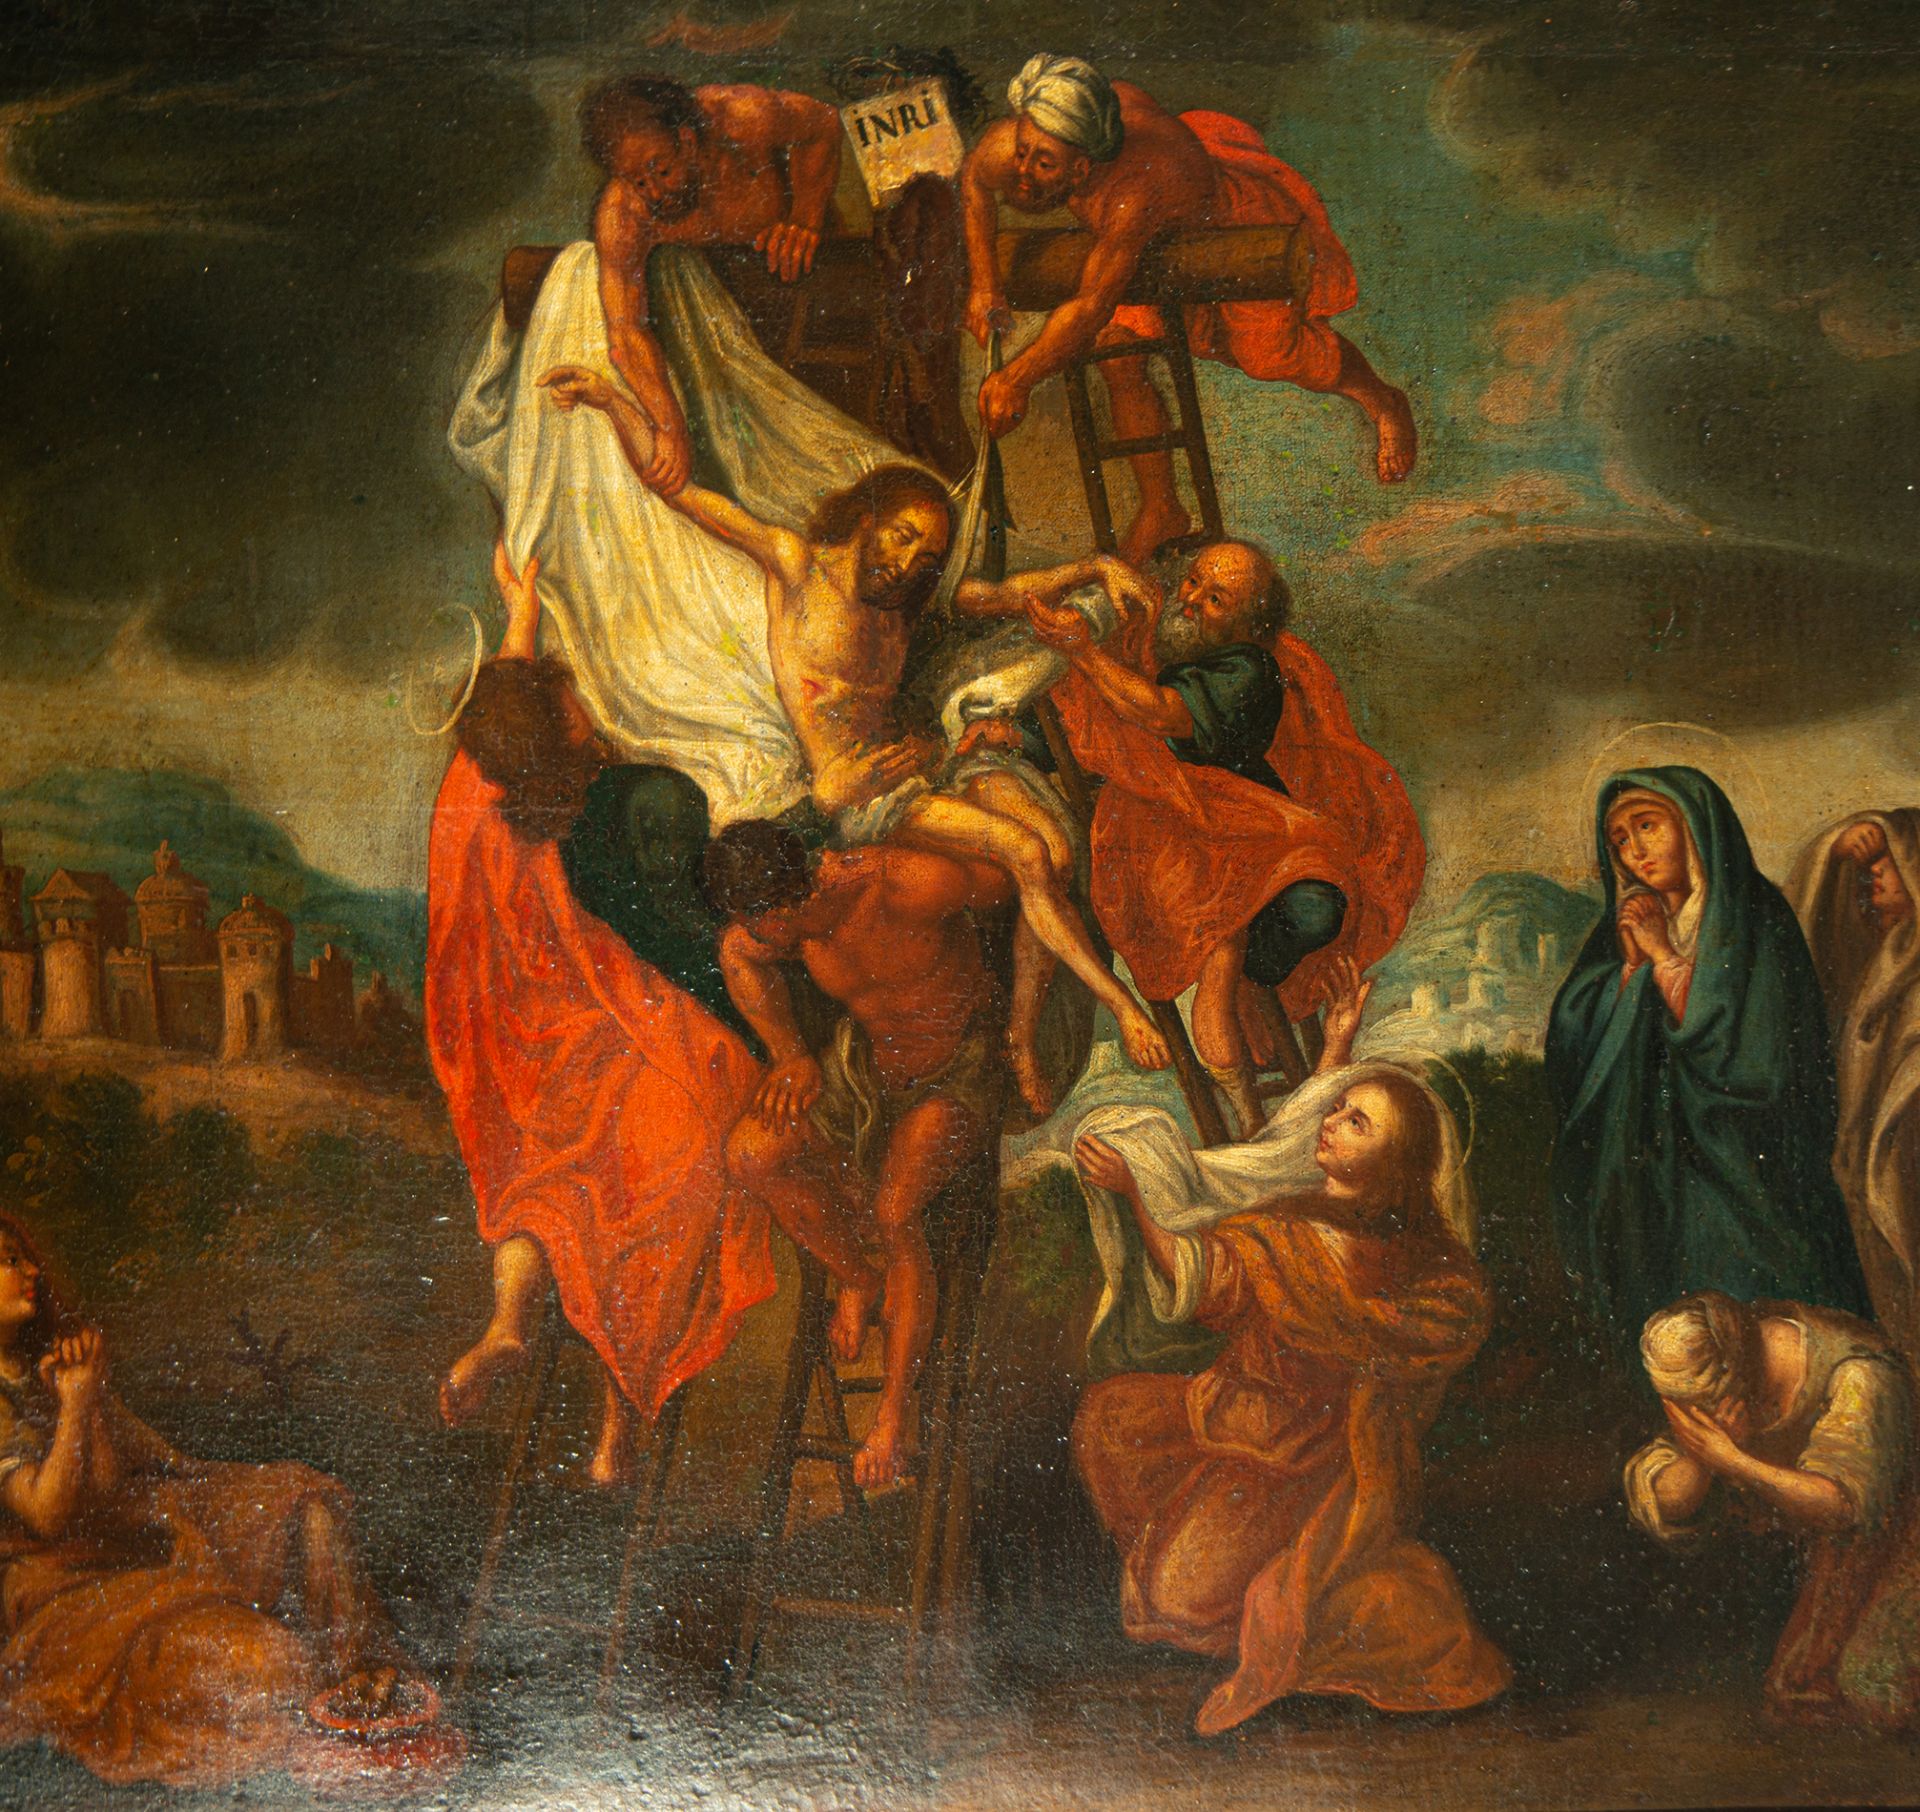 Jesus Descending from the Cross, Spanish school of the 17th century - Image 2 of 11